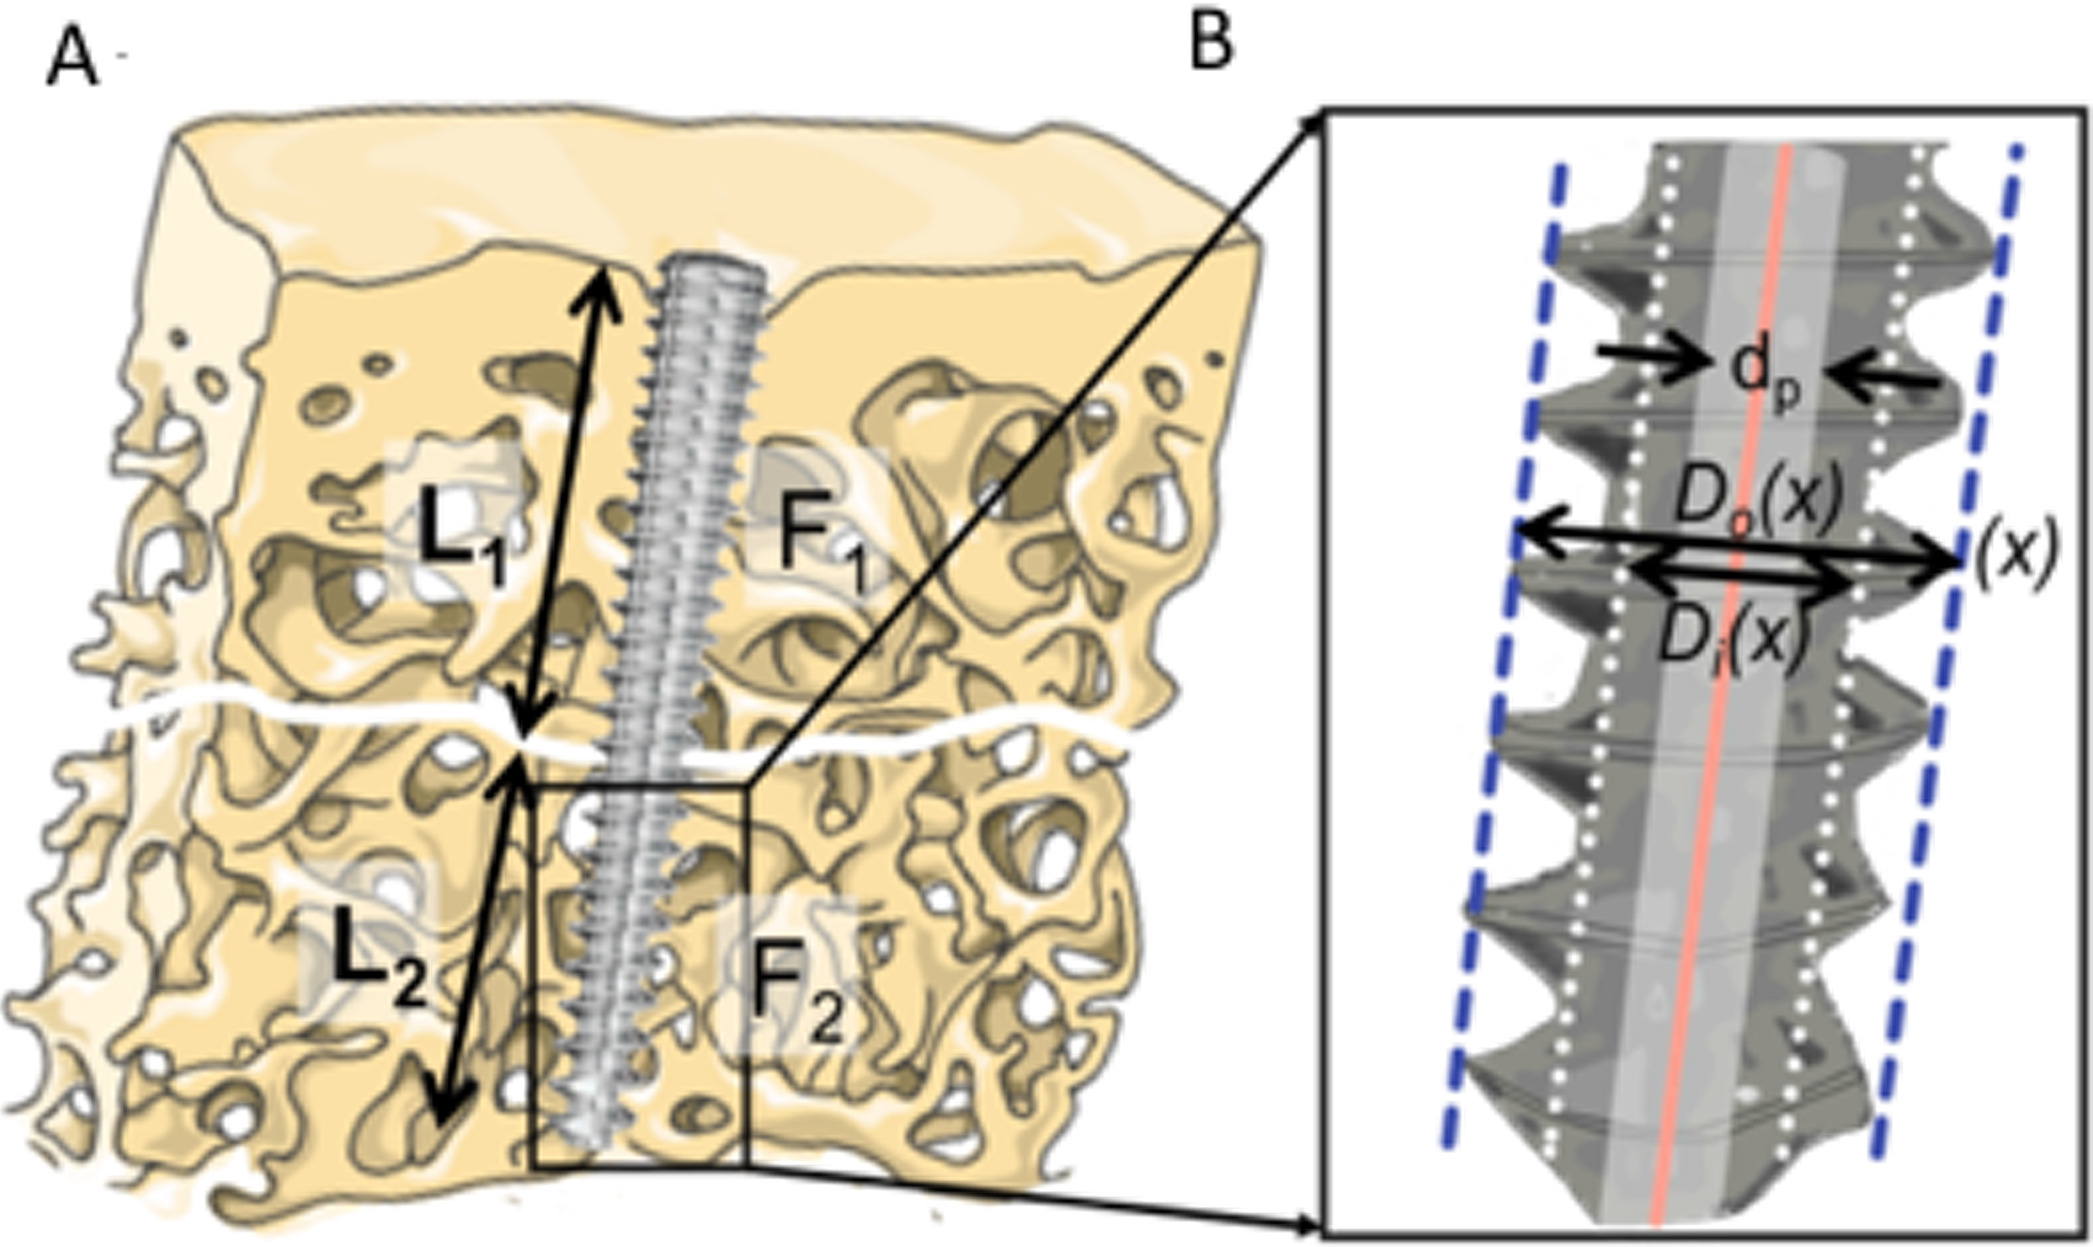 Fig. 4 
          a) The pullout force of the headless screw fixation originating from F1 or F2. When F1 < F2, the proximal fragment would be pulled out. Conversely, when F1 > F2, the fragment and screw would be pulled out together. b) The pullout force of the screw is associated with the screw design and diameter of the predrilling tunnel (dp). F(1 or 2), the pullout force of the screw; L(1 or 2), the screw length within the bone; X, the specific x position along the screw length; Di(X), inner diameter of the screw at X position; Do(X), outer diameter of the screw at X position; dp, diameter of the predrilling tunnel.
        